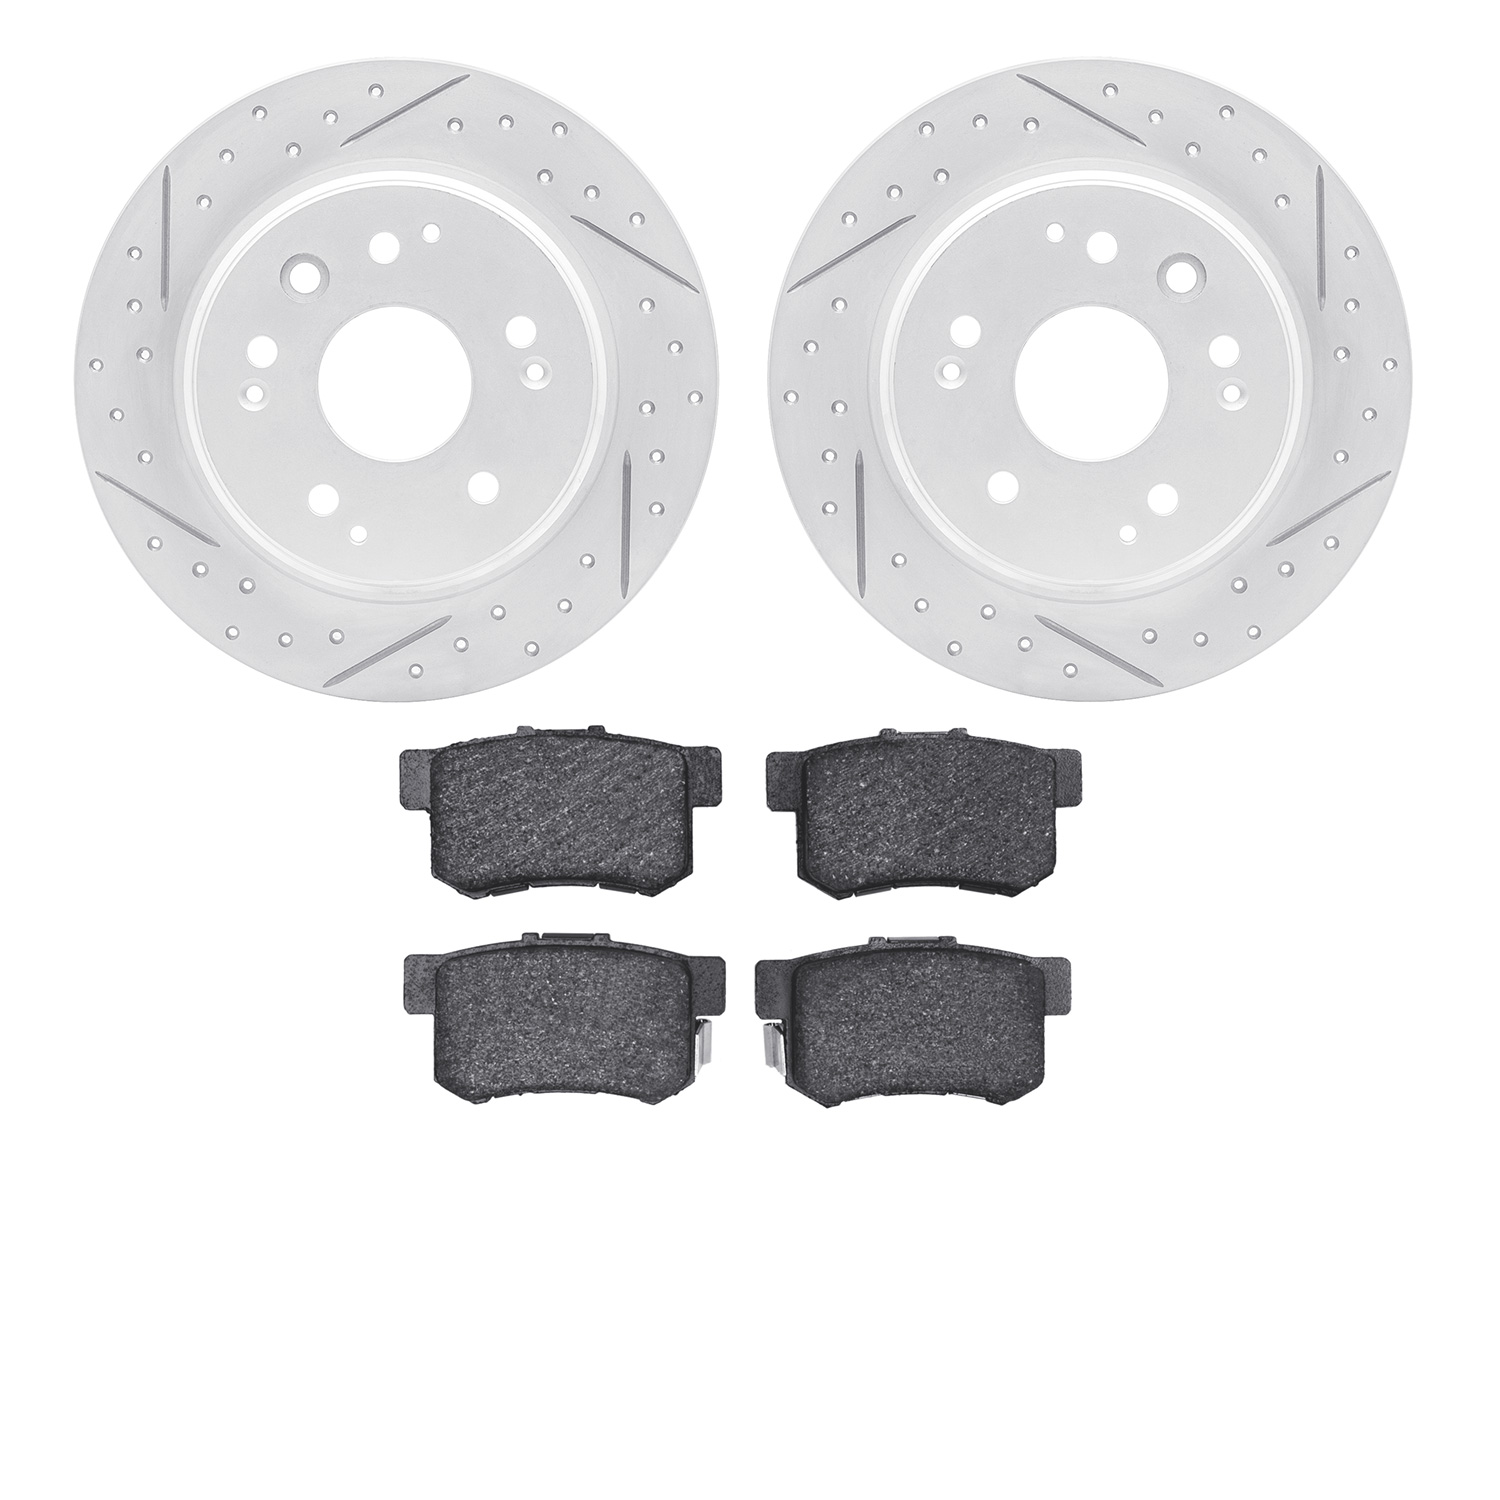 2502-58009 Geoperformance Drilled/Slotted Rotors w/5000 Advanced Brake Pads Kit, 1999-2003 Acura/Honda, Position: Rear